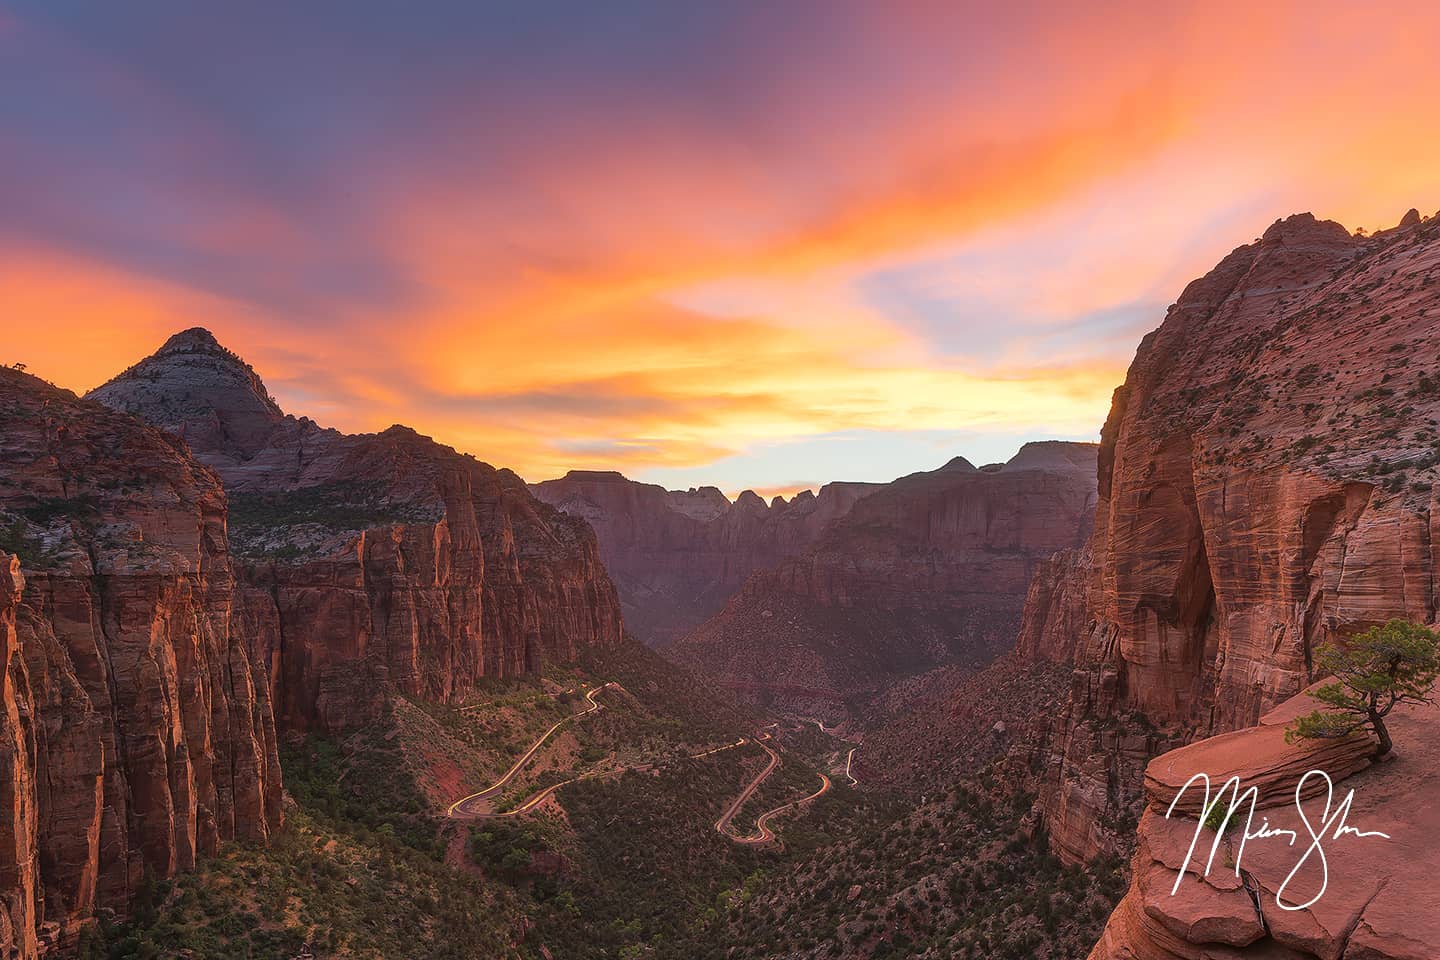 Zion Canyon Overlook Sunset - Zion National Park, Utah